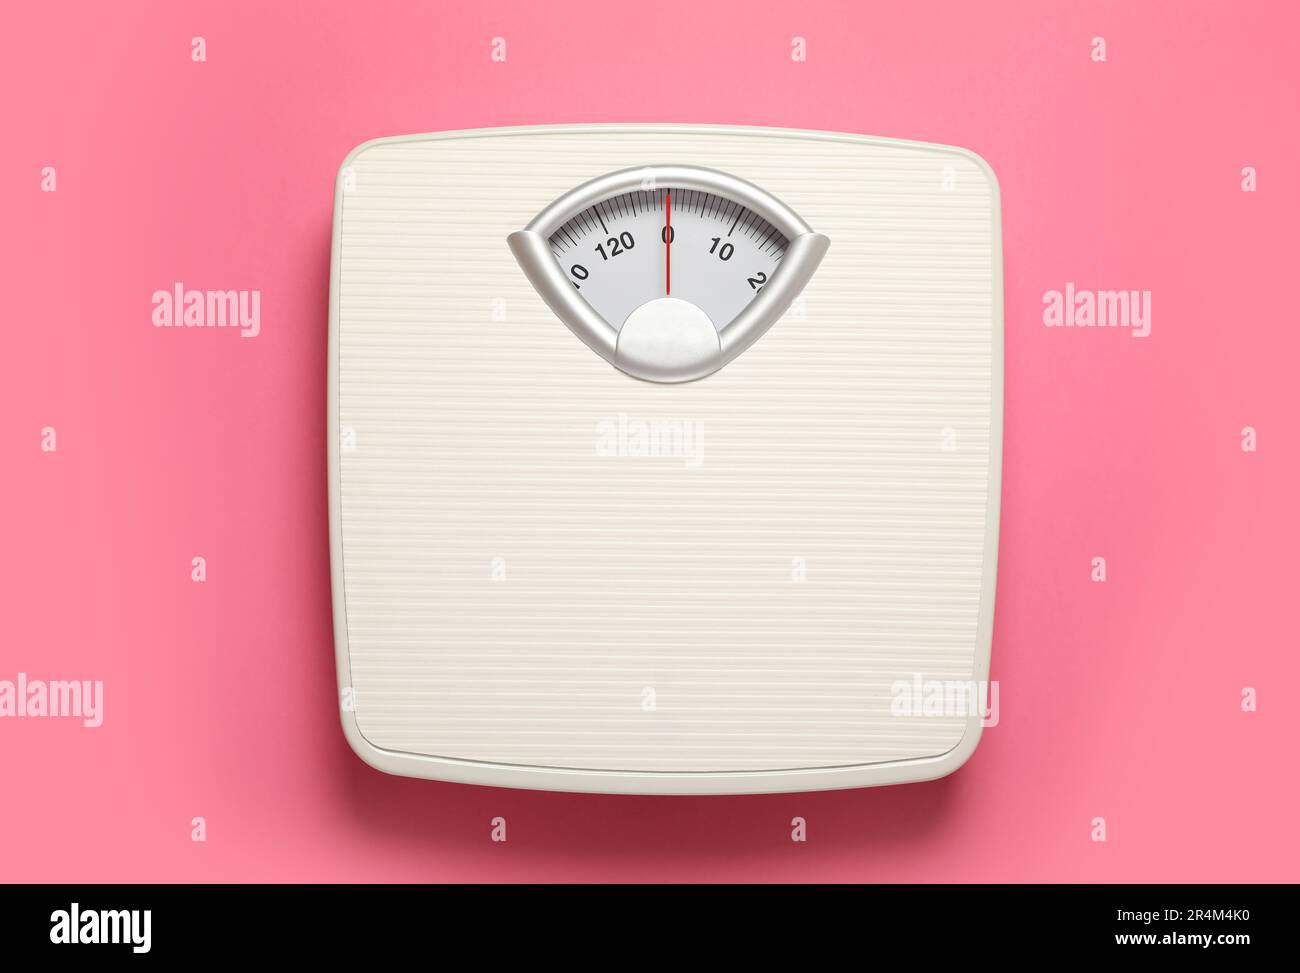 https://c8.alamy.com/comp/2R4M4K0/weigh-scales-on-pink-background-top-view-overweight-concept-2R4M4K0.jpg